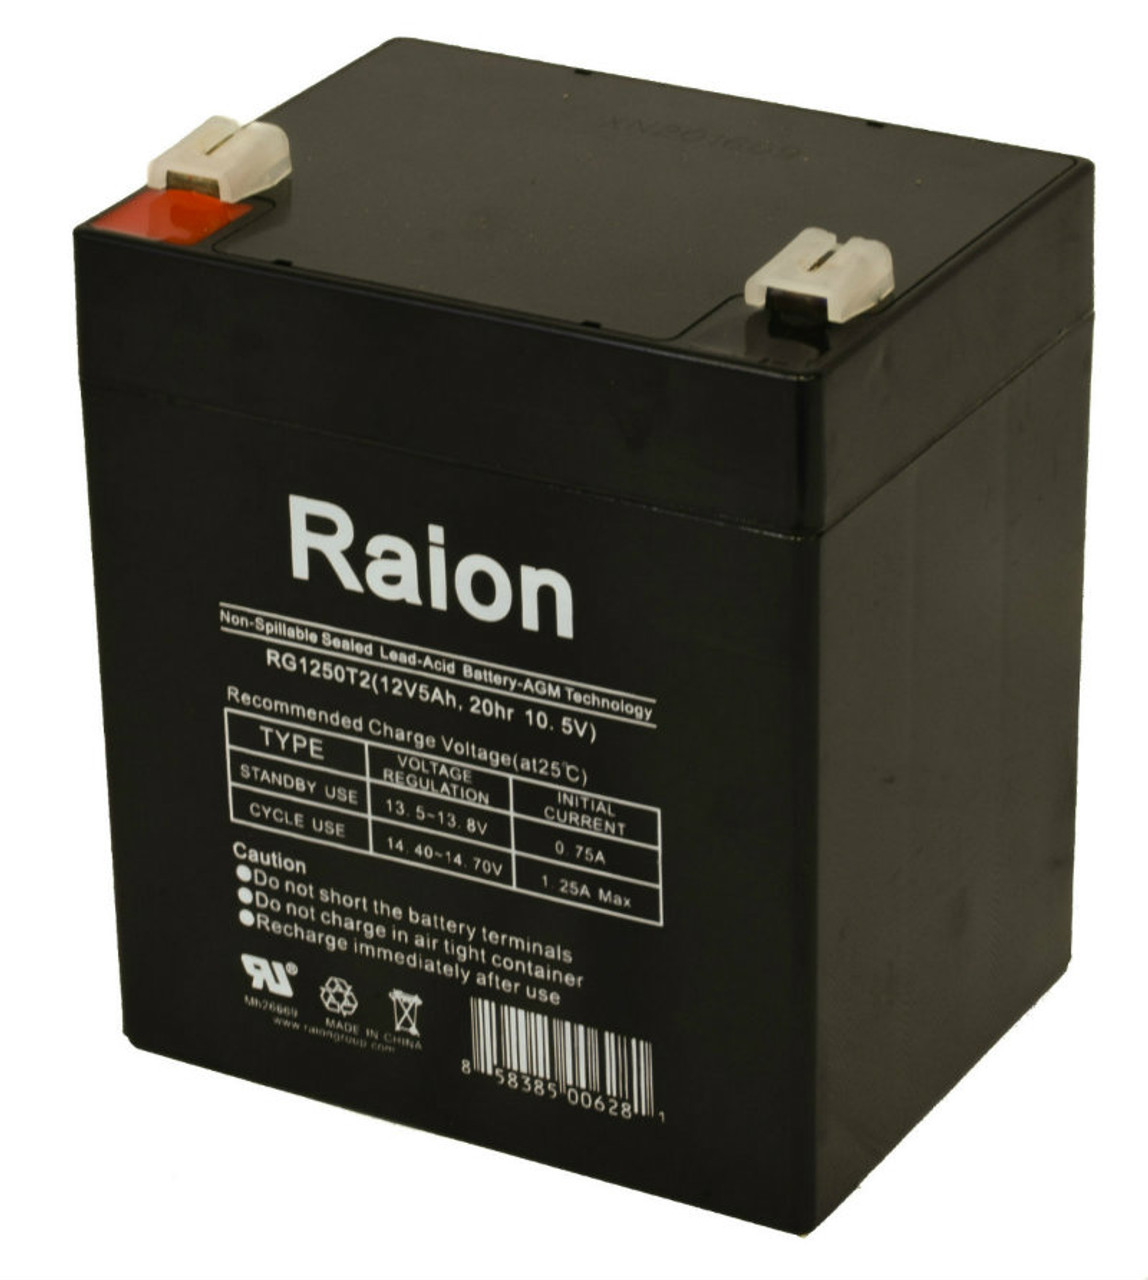 Raion Power RG1250T1 Replacement Battery for Narada 6-FM-4 F1